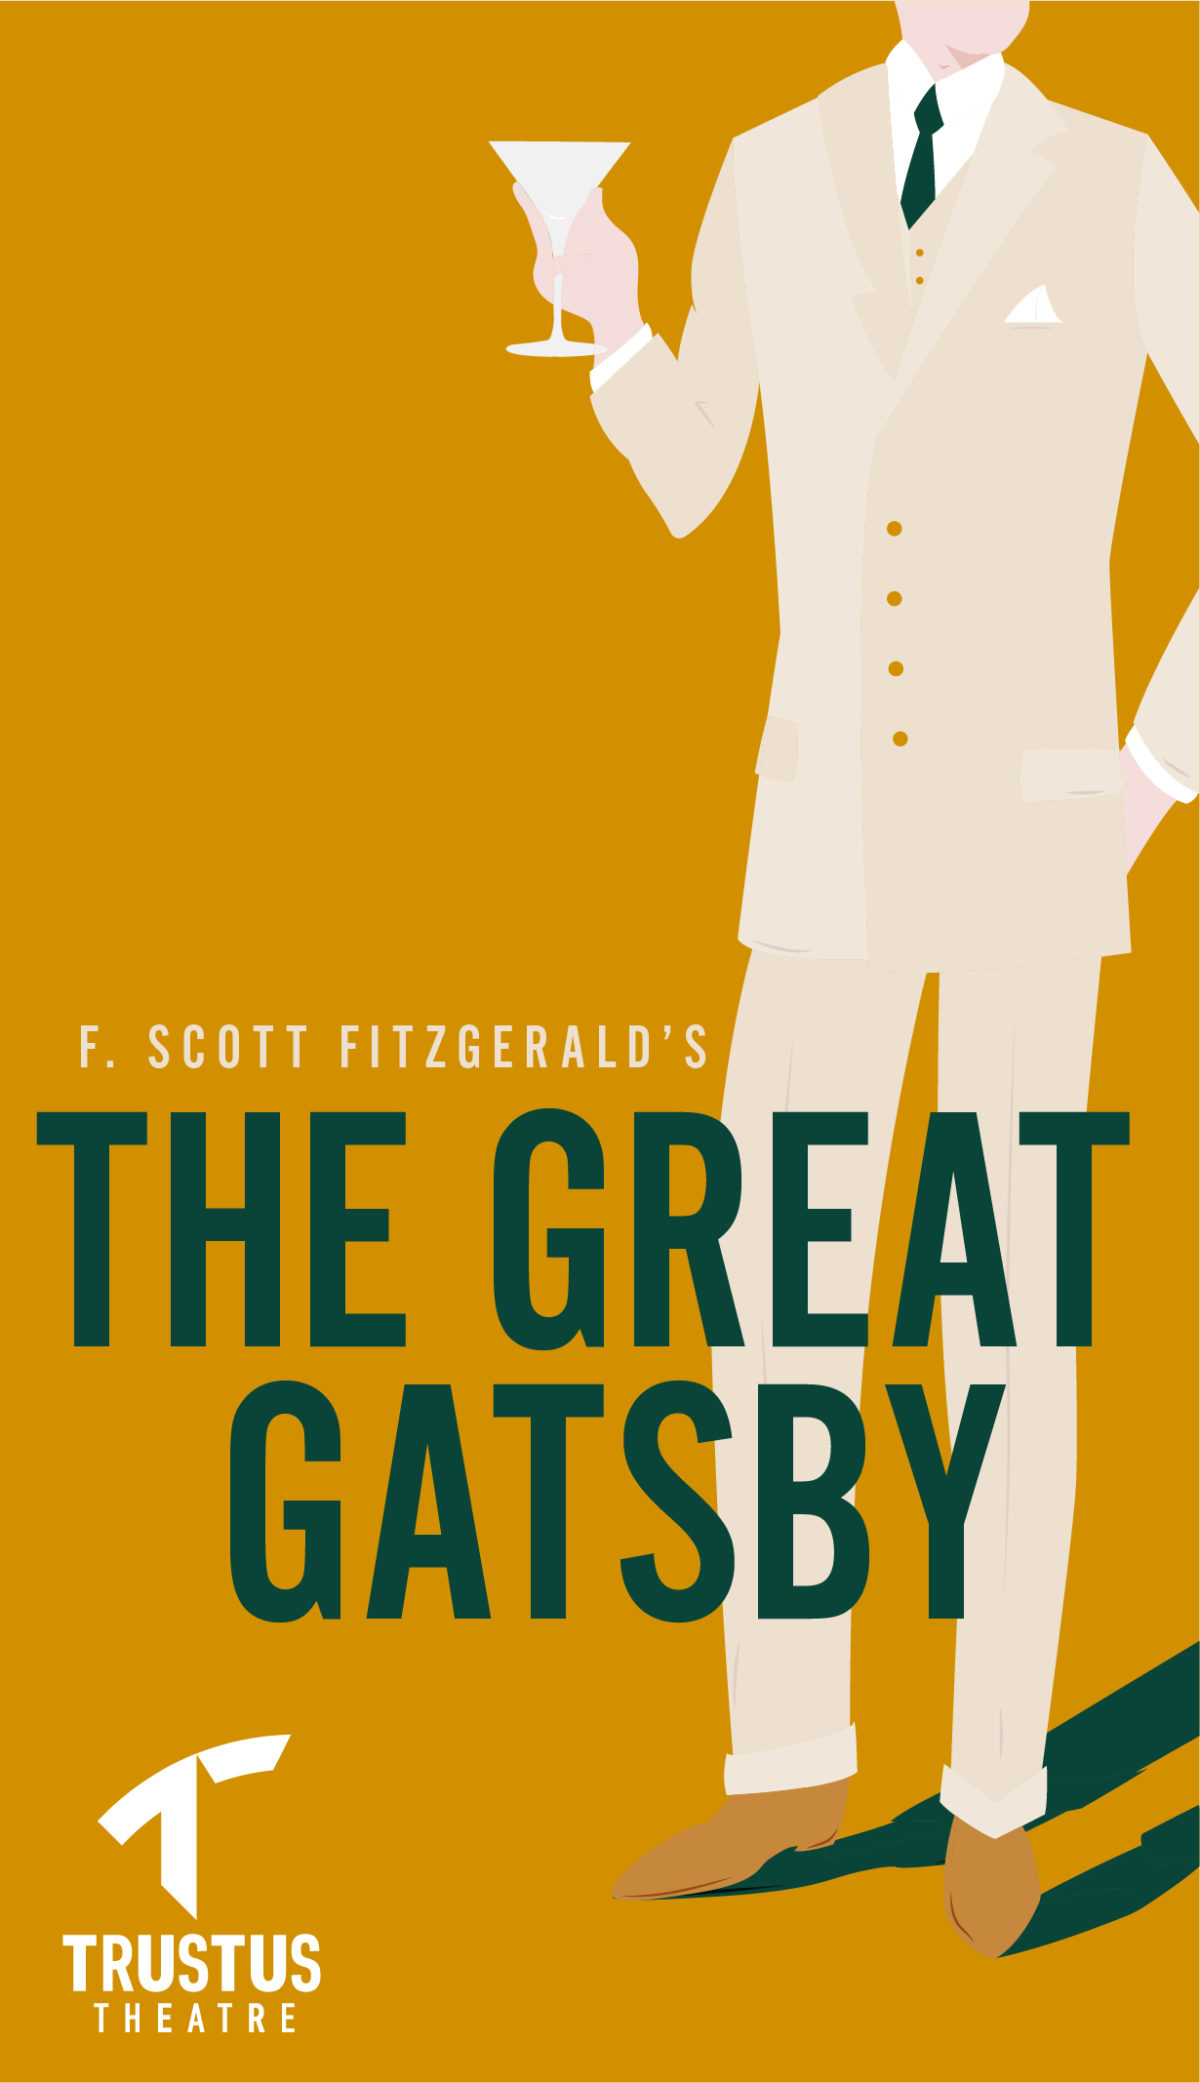 THE GREAT GATSBY: A JAZZ-AGE COLLABORATION AT TRUSTUS THEATRE